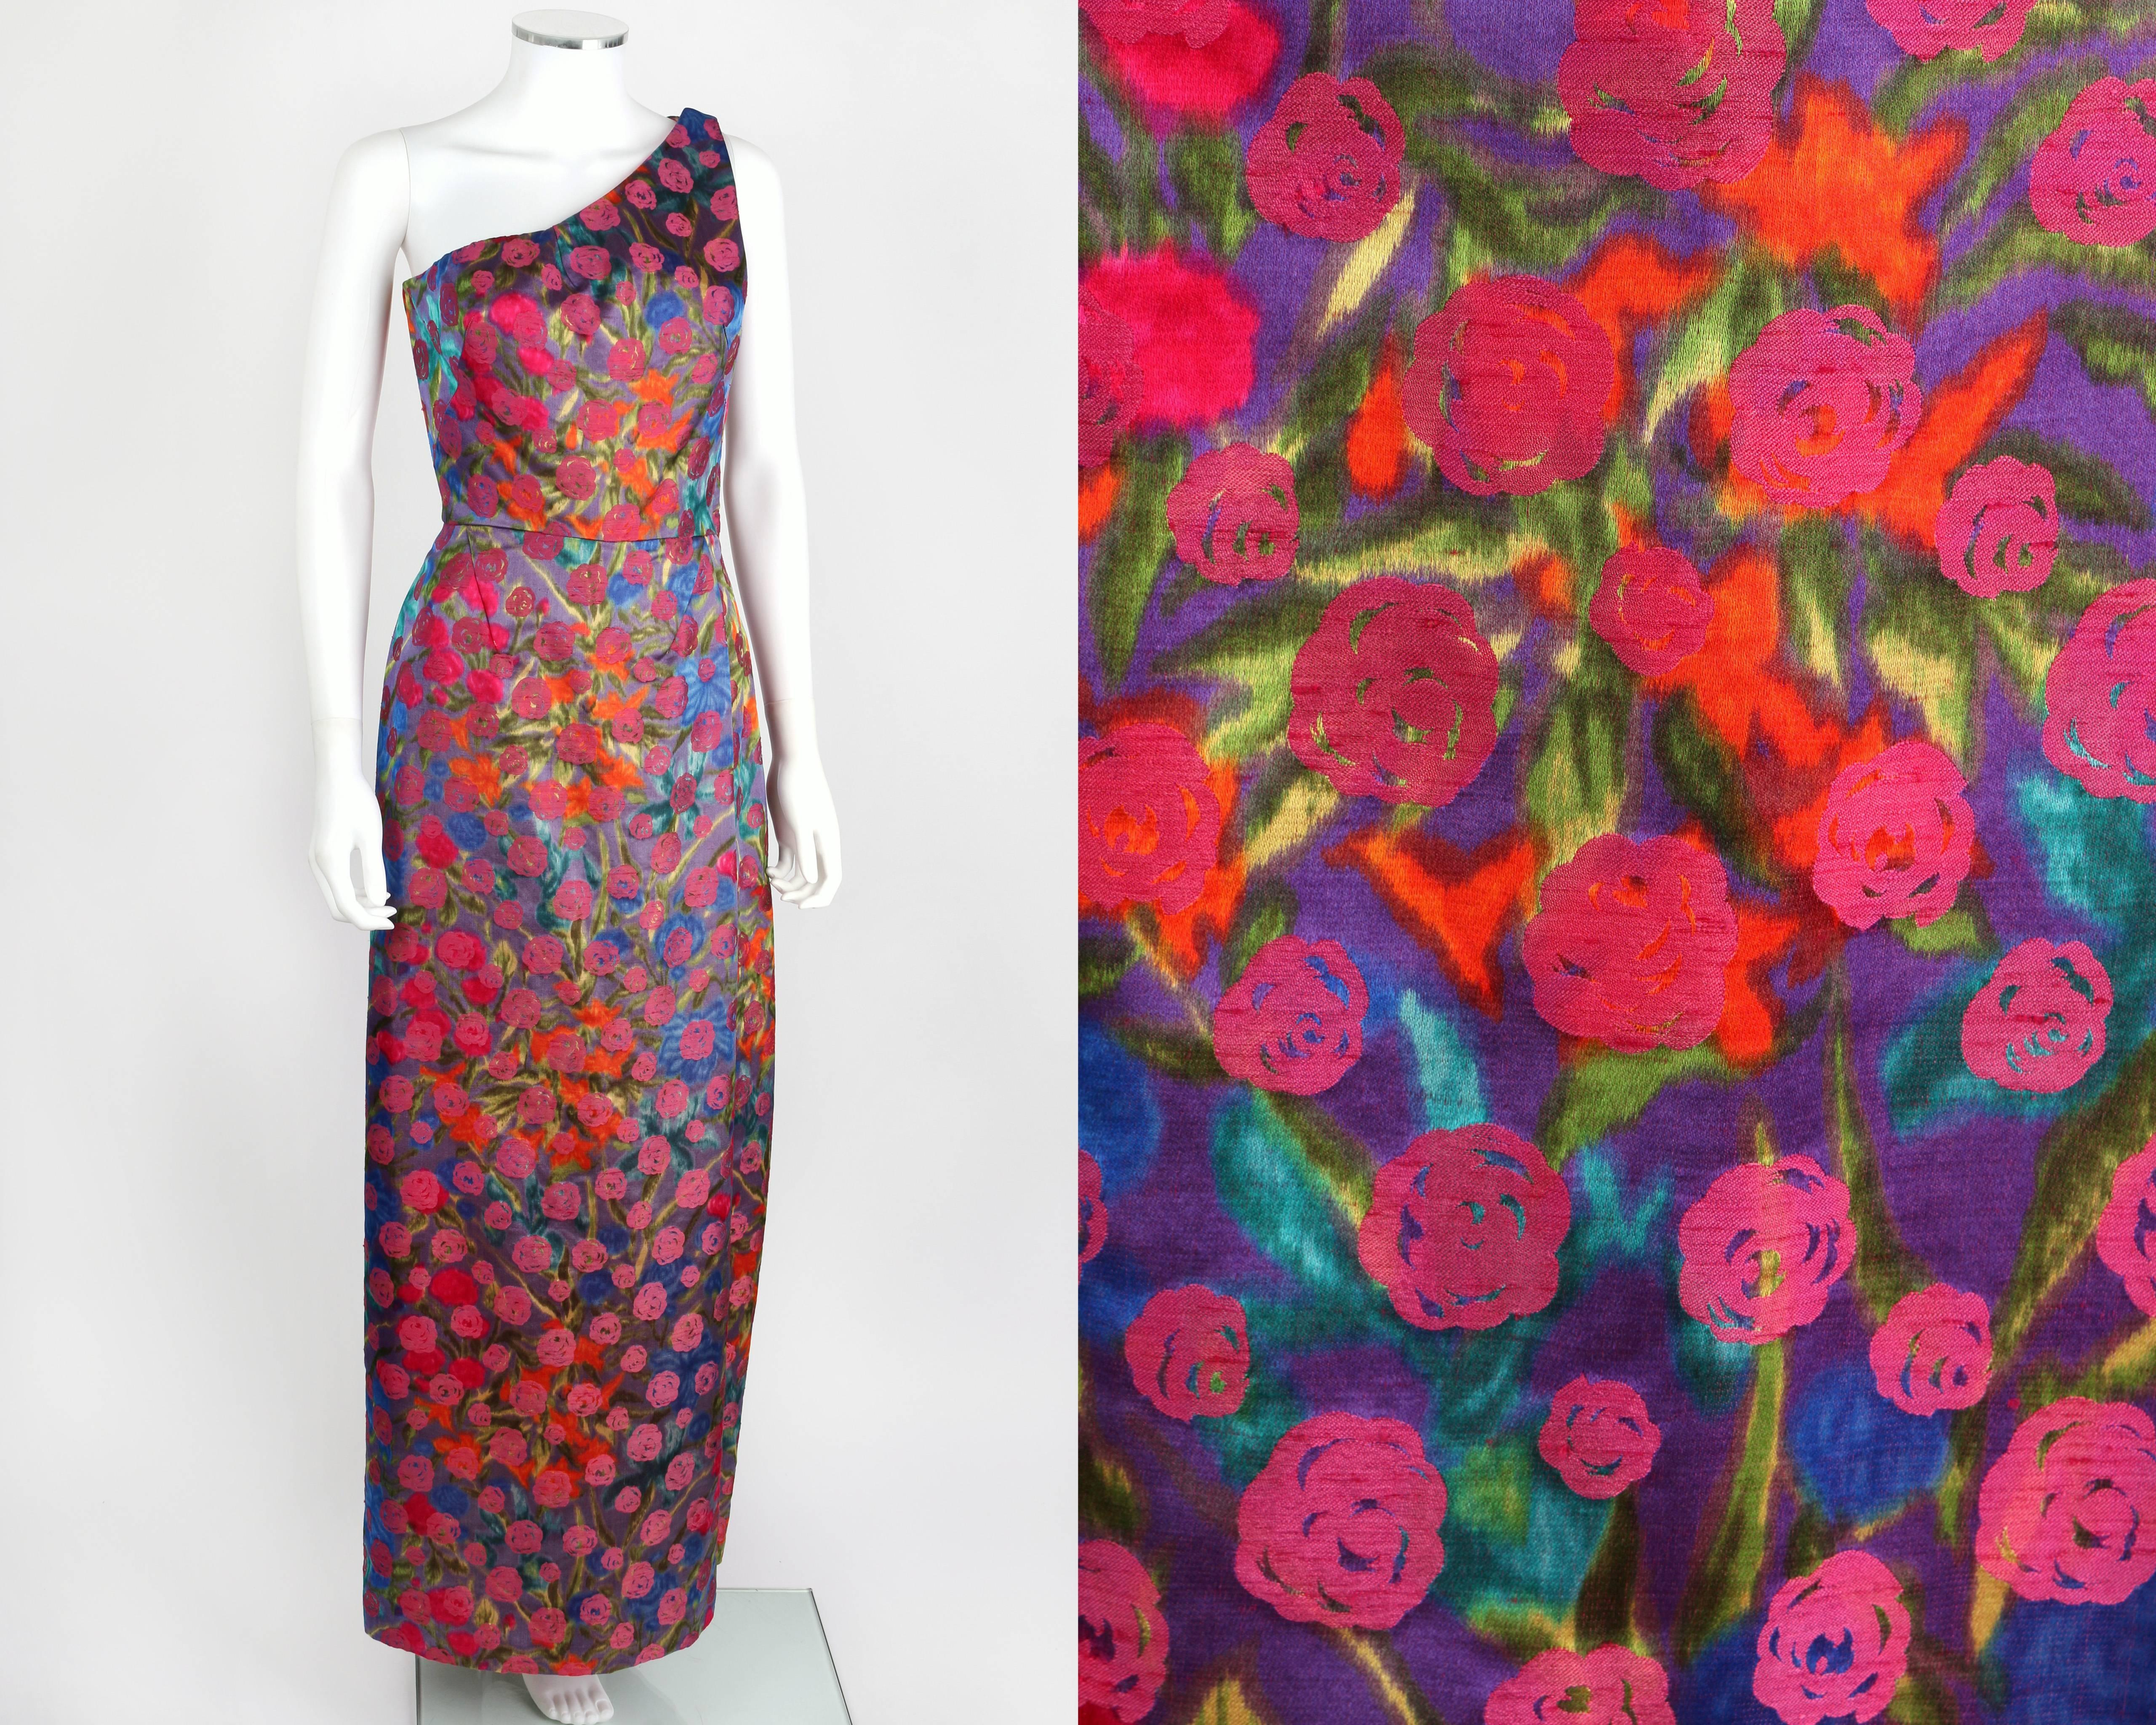 Vintage Bergdorf Goodman early 1960's floral brocade one shoulder evening dress. Multicolor painterly floral print with pink flower pattern overlay. Single pleat at side front and back of skirt. Metal zipper closure at side. Three hook and eye